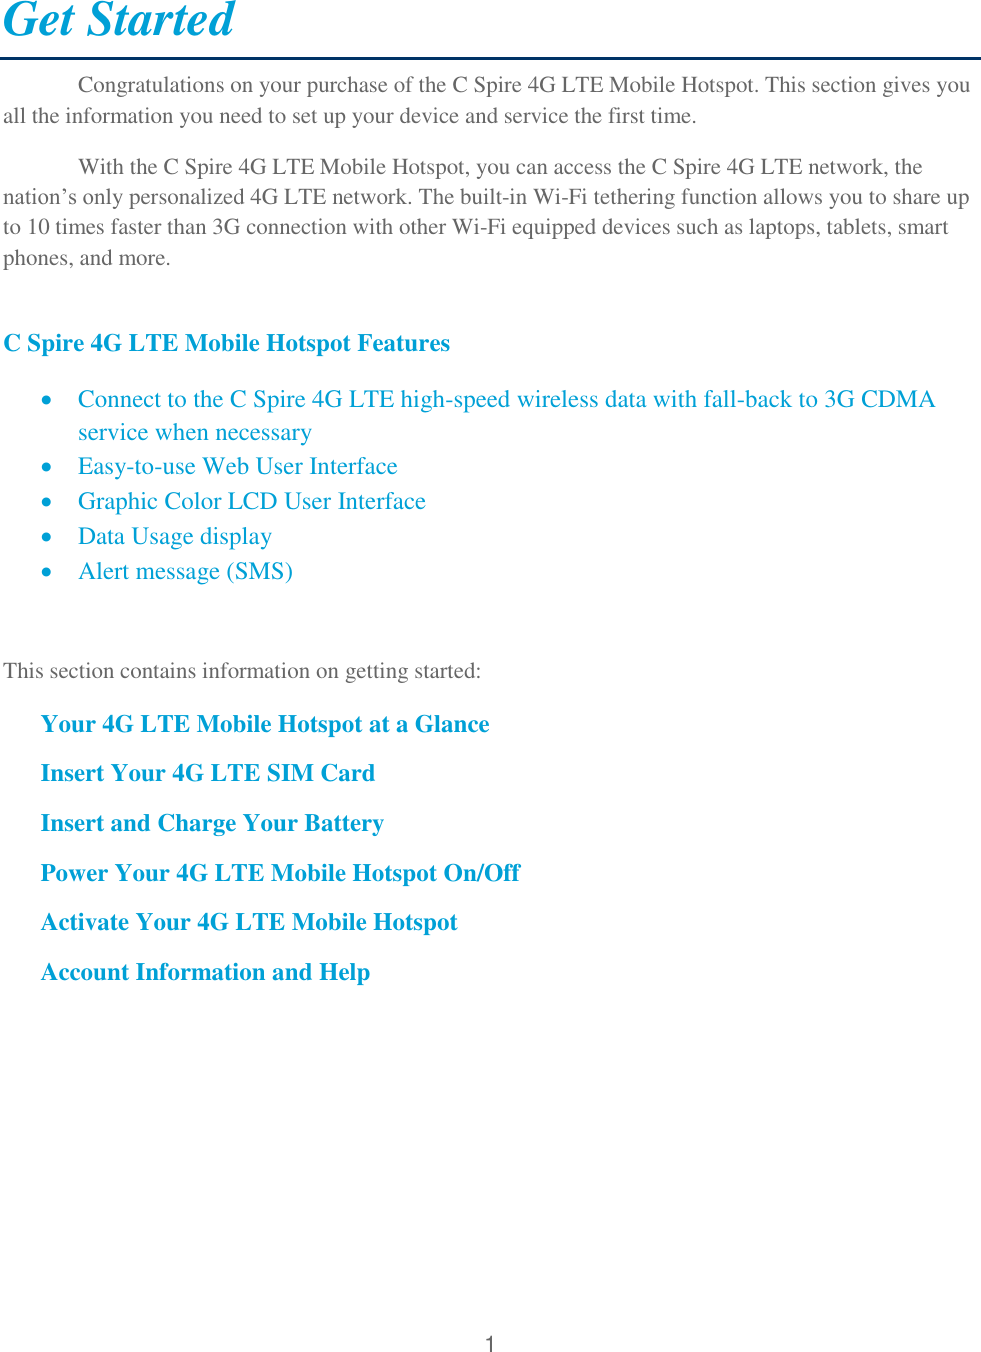 1  Get Started Congratulations on your purchase of the C Spire 4G LTE Mobile Hotspot. This section gives you all the information you need to set up your device and service the first time. With the C Spire 4G LTE Mobile Hotspot, you can access the C Spire 4G LTE network, the nation’s only personalized 4G LTE network. The built-in Wi-Fi tethering function allows you to share up to 10 times faster than 3G connection with other Wi-Fi equipped devices such as laptops, tablets, smart phones, and more.  C Spire 4G LTE Mobile Hotspot Features  Connect to the C Spire 4G LTE high-speed wireless data with fall-back to 3G CDMA service when necessary  Easy-to-use Web User Interface  Graphic Color LCD User Interface   Data Usage display  Alert message (SMS)  This section contains information on getting started: Your 4G LTE Mobile Hotspot at a Glance Insert Your 4G LTE SIM Card Insert and Charge Your Battery Power Your 4G LTE Mobile Hotspot On/Off Activate Your 4G LTE Mobile Hotspot Account Information and Help      